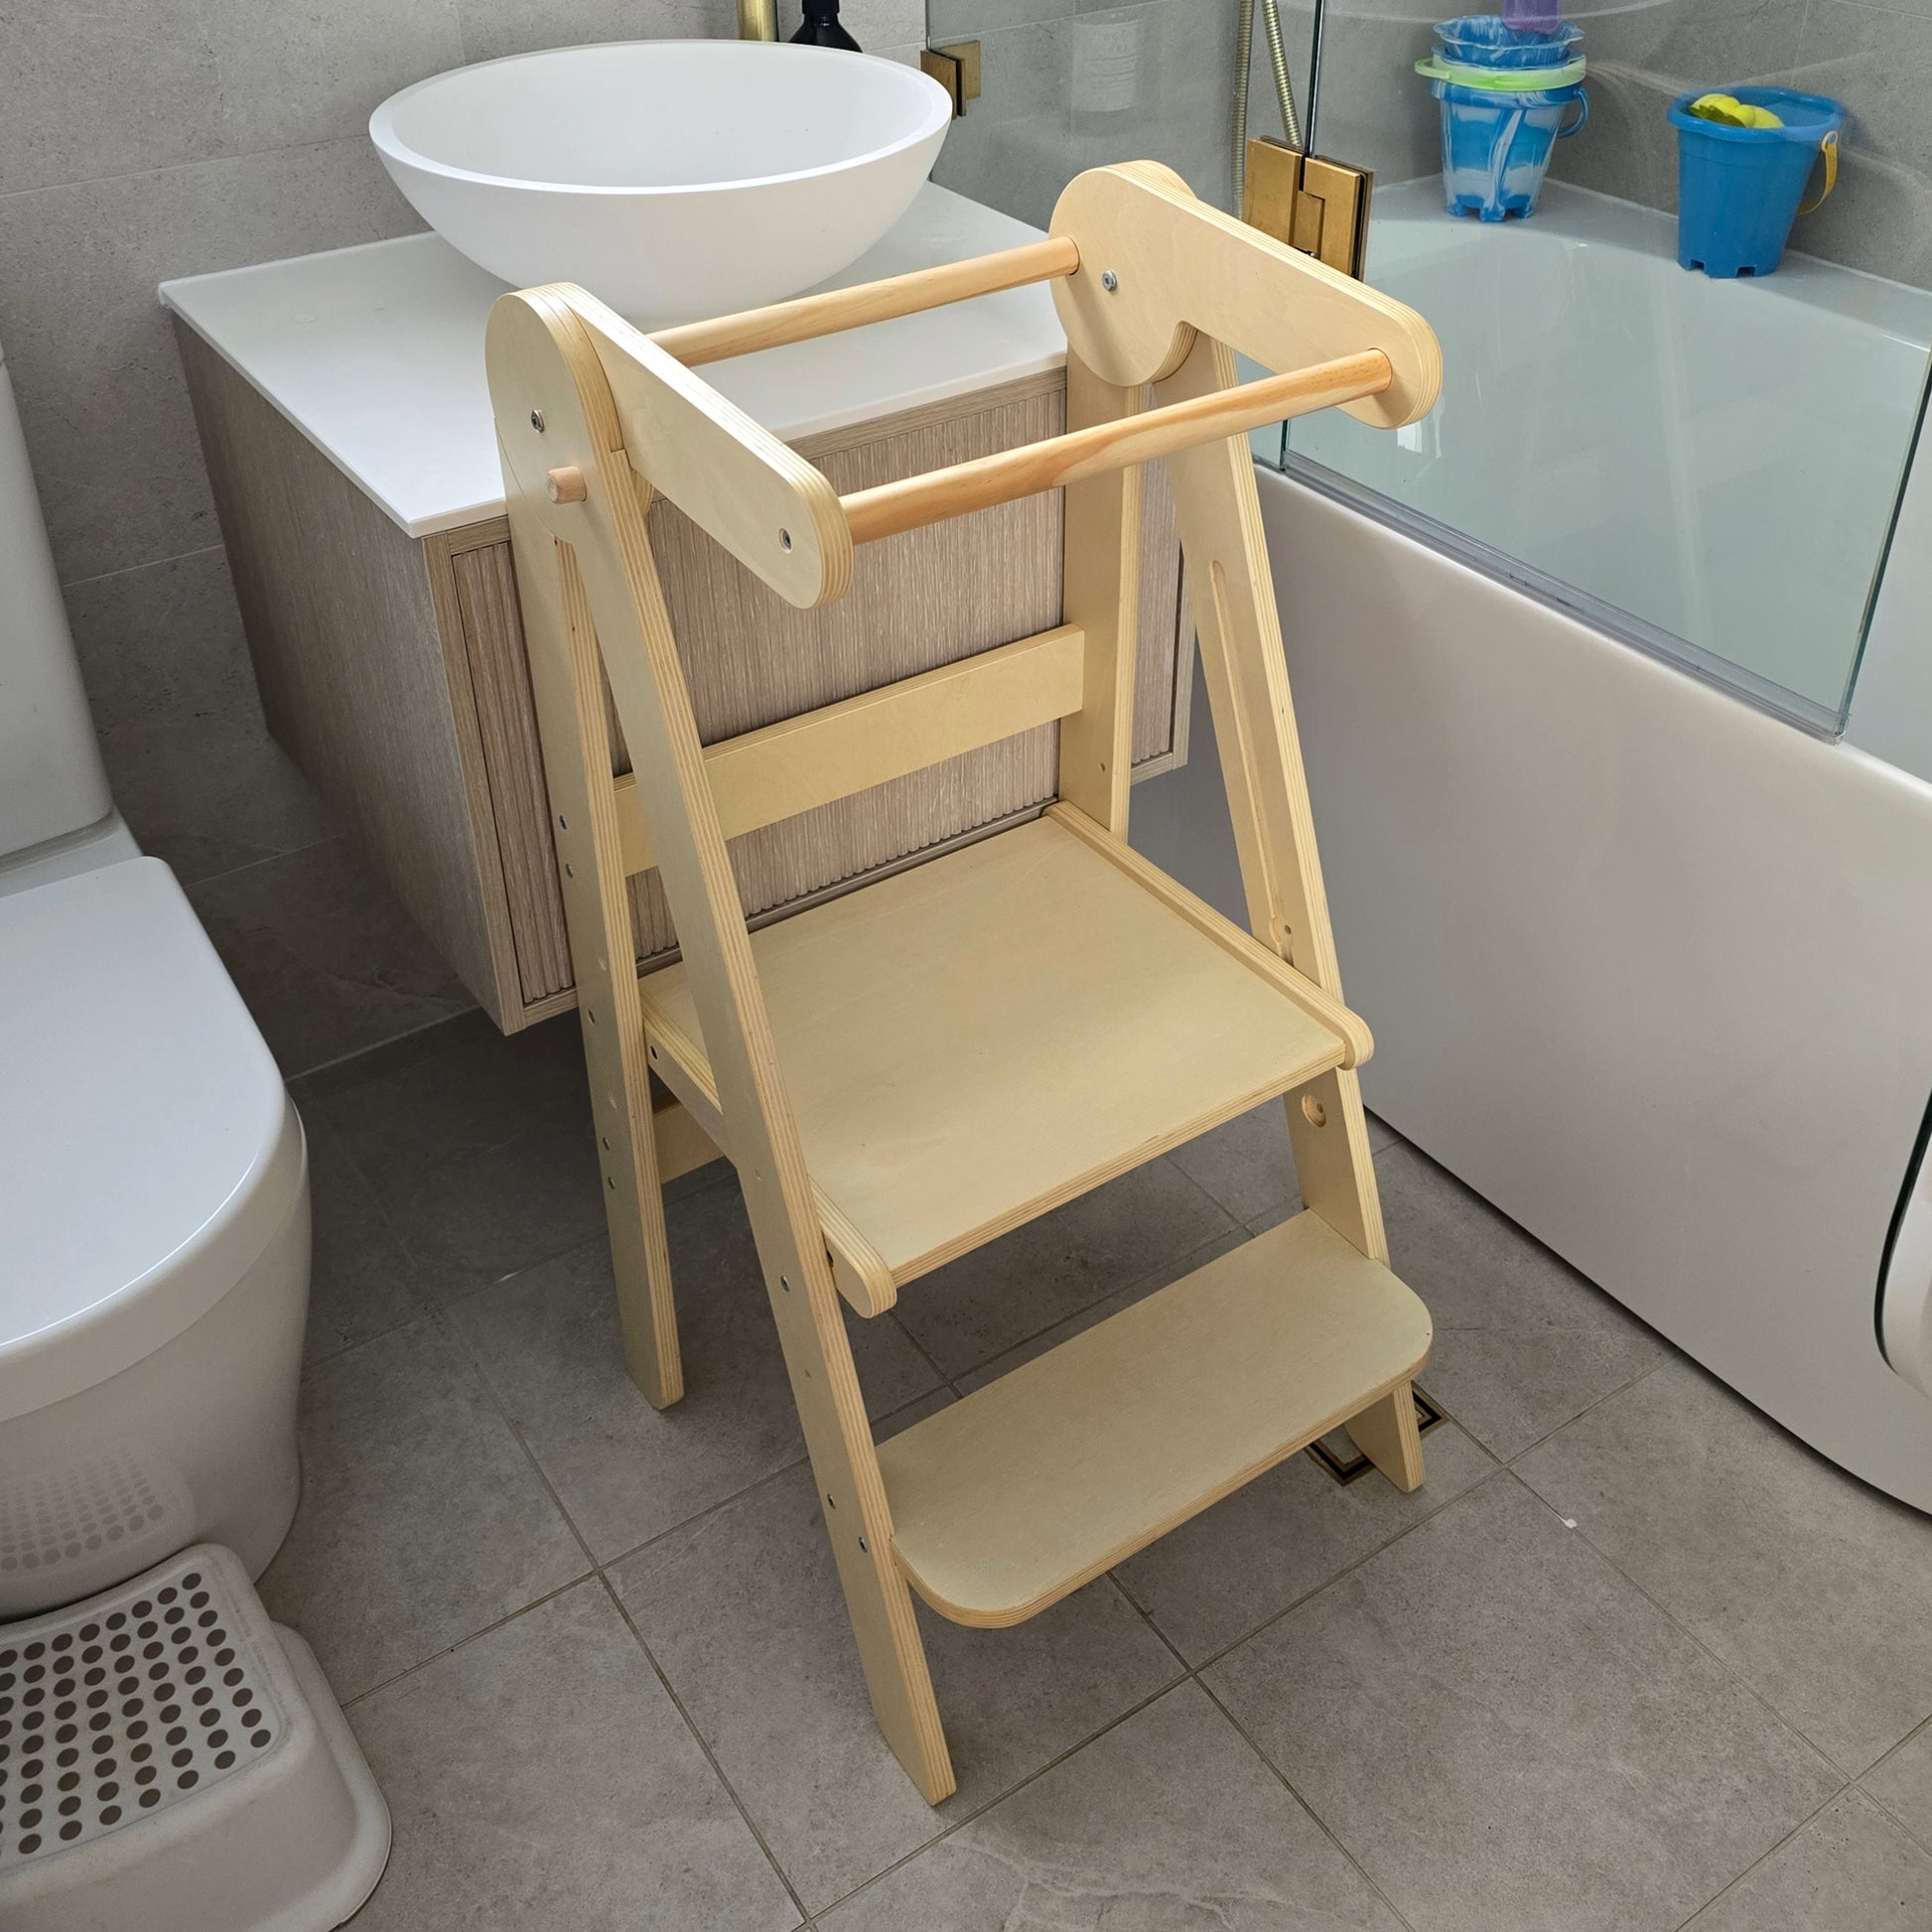 Four Little Monkeys Natural Adjustable Foldable Learning Tower in position at a bathroom sink, ready for a child's use.